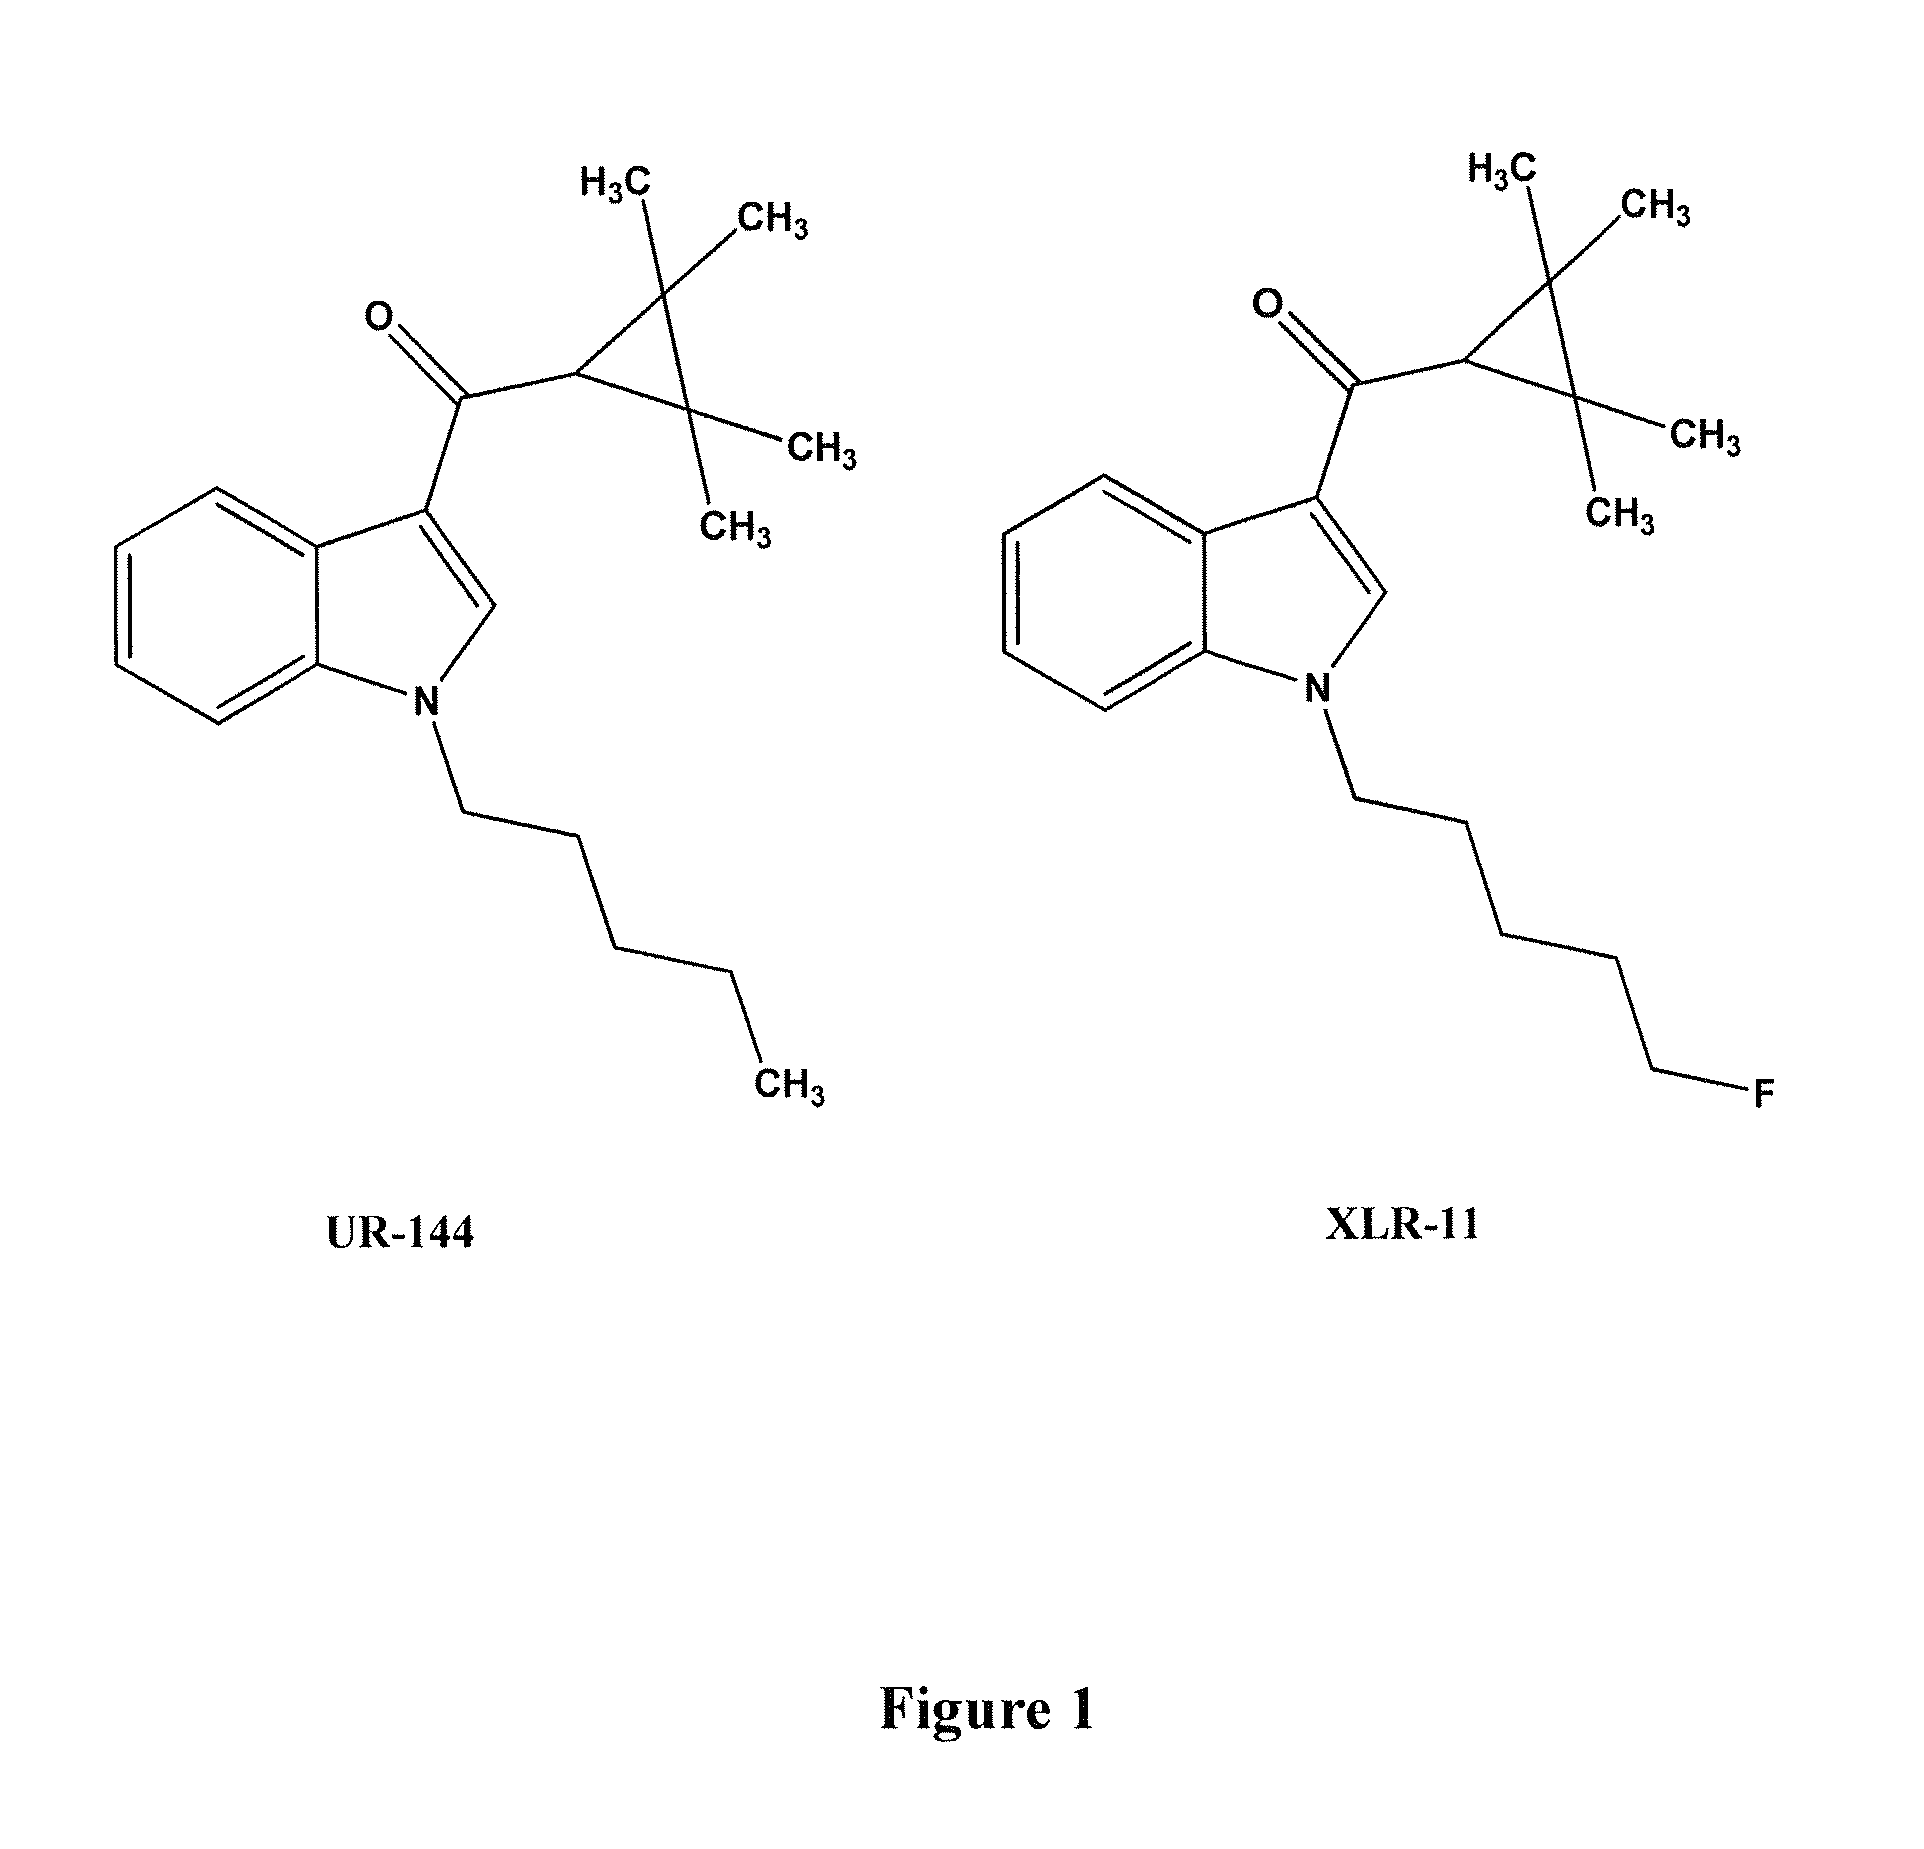 Immunoassay for cyclopropylindole based synthetic cannabinoids, metabolites and derivatives thereof